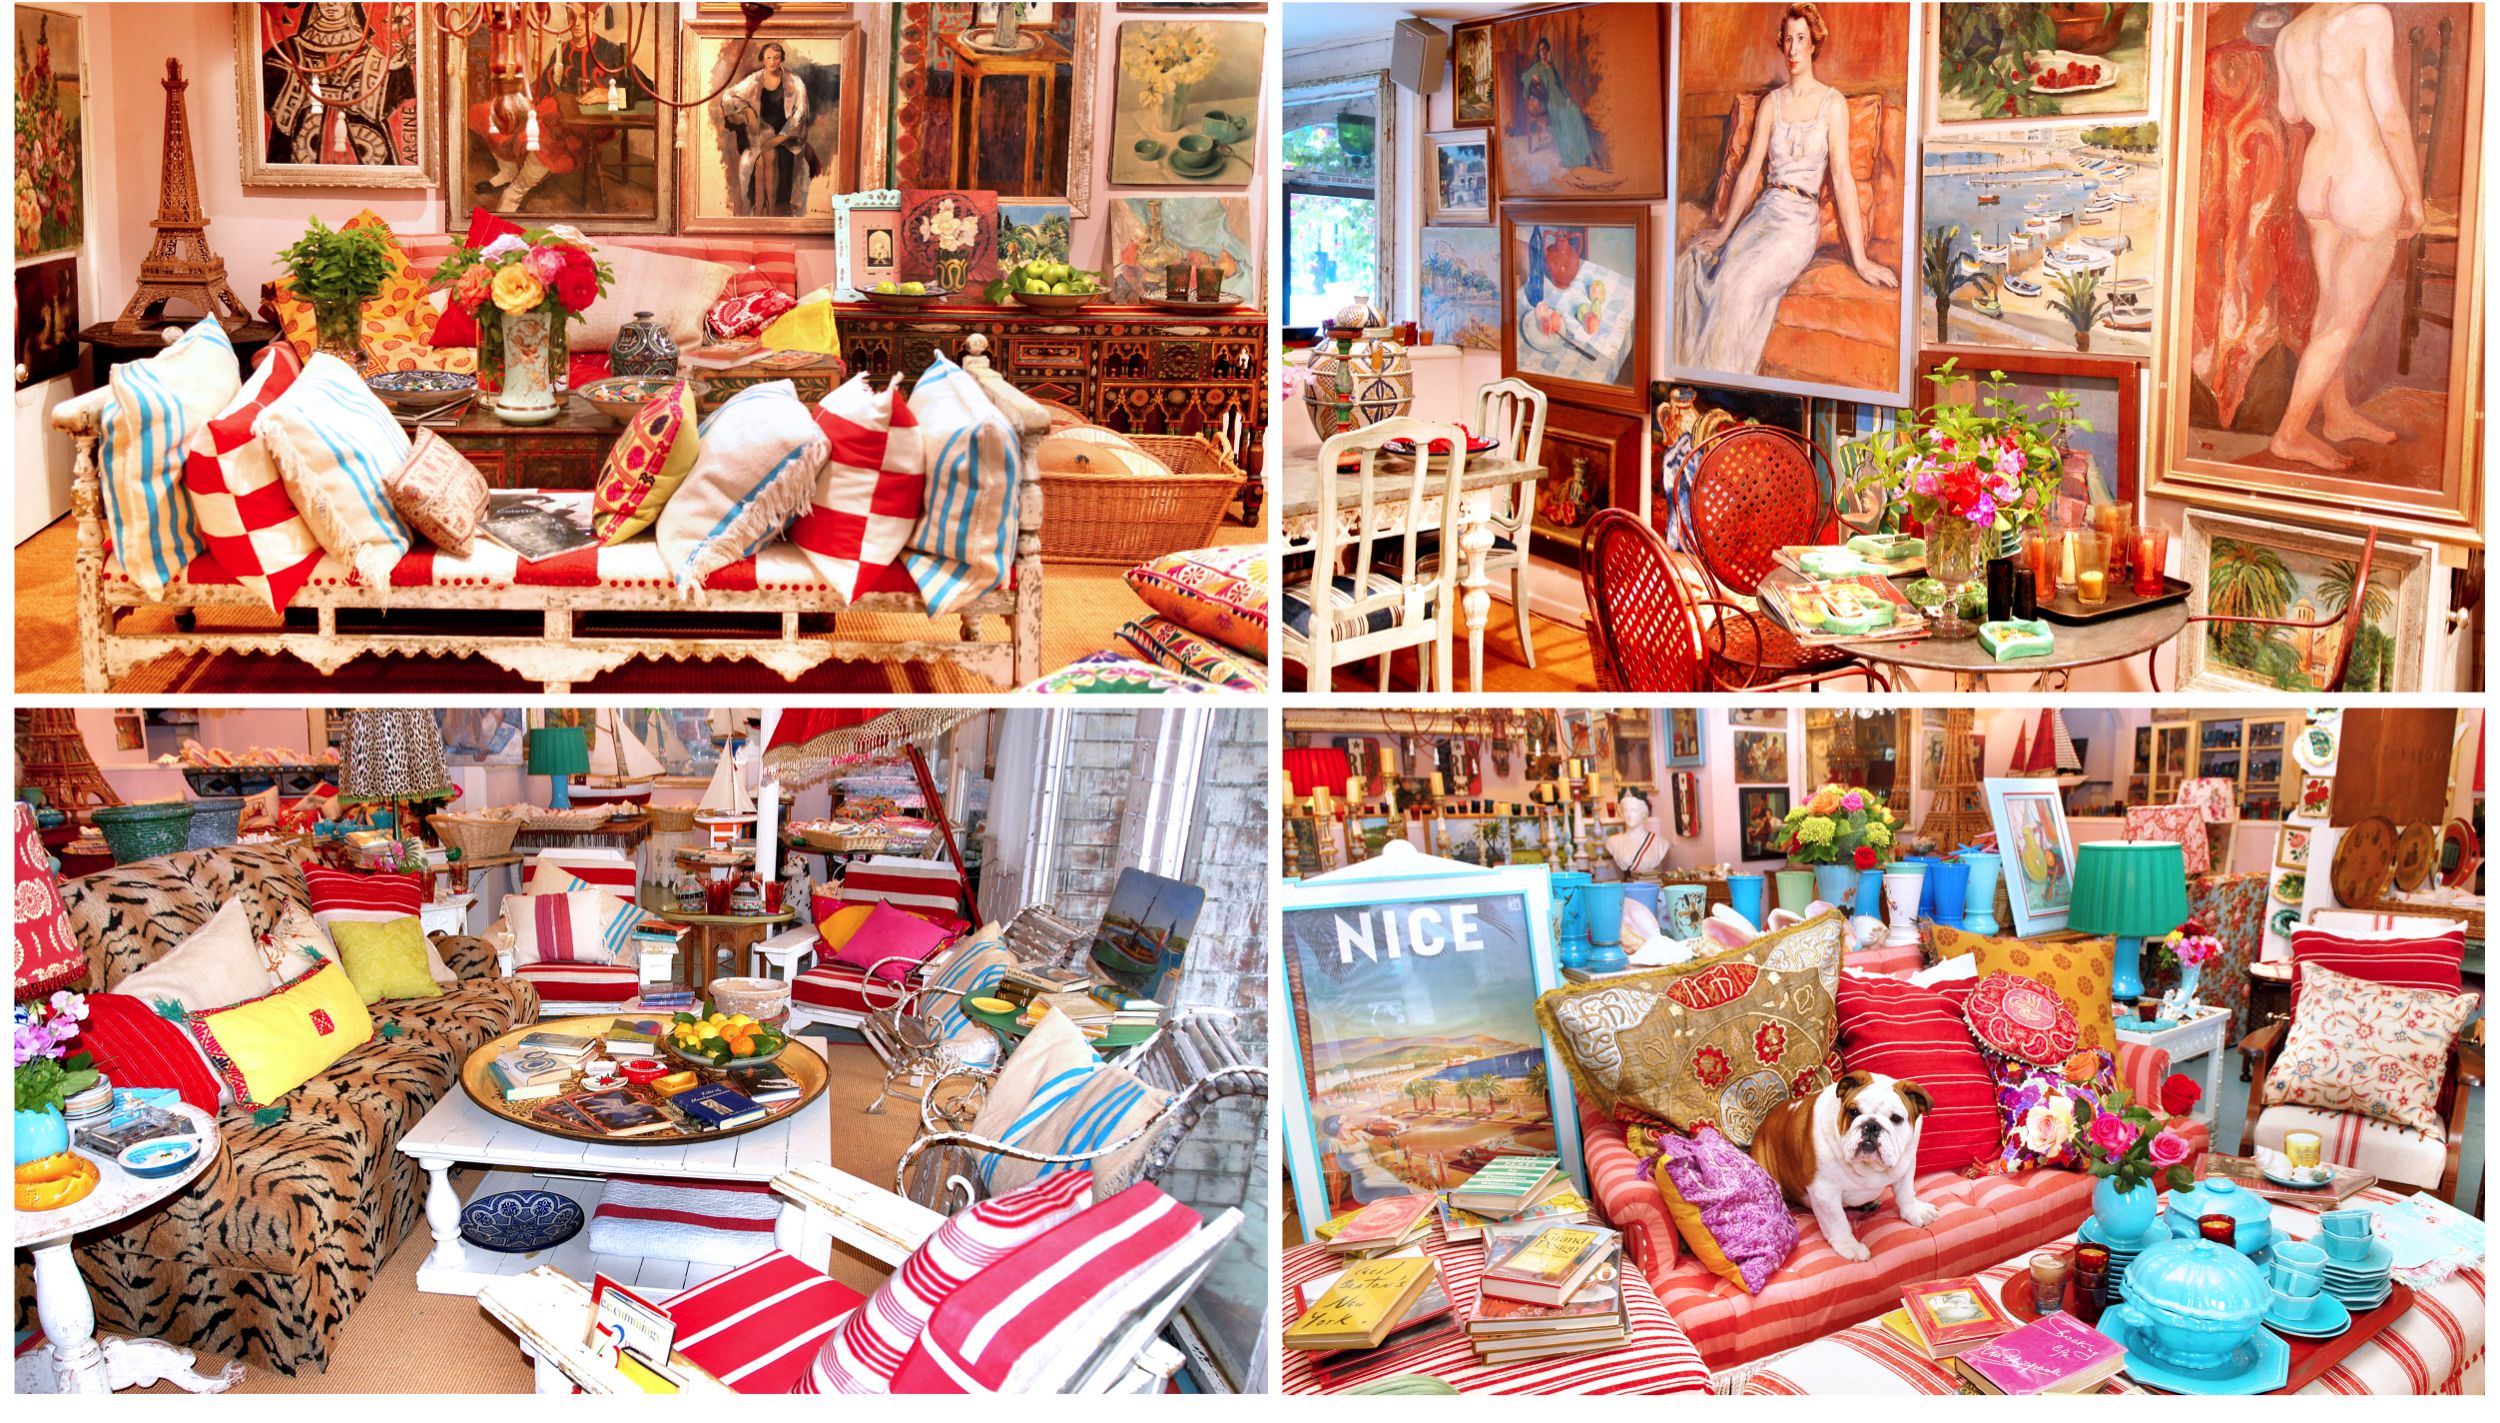 Collage of four images of the Indigo Seas shop interior including sitting areas and tea sets